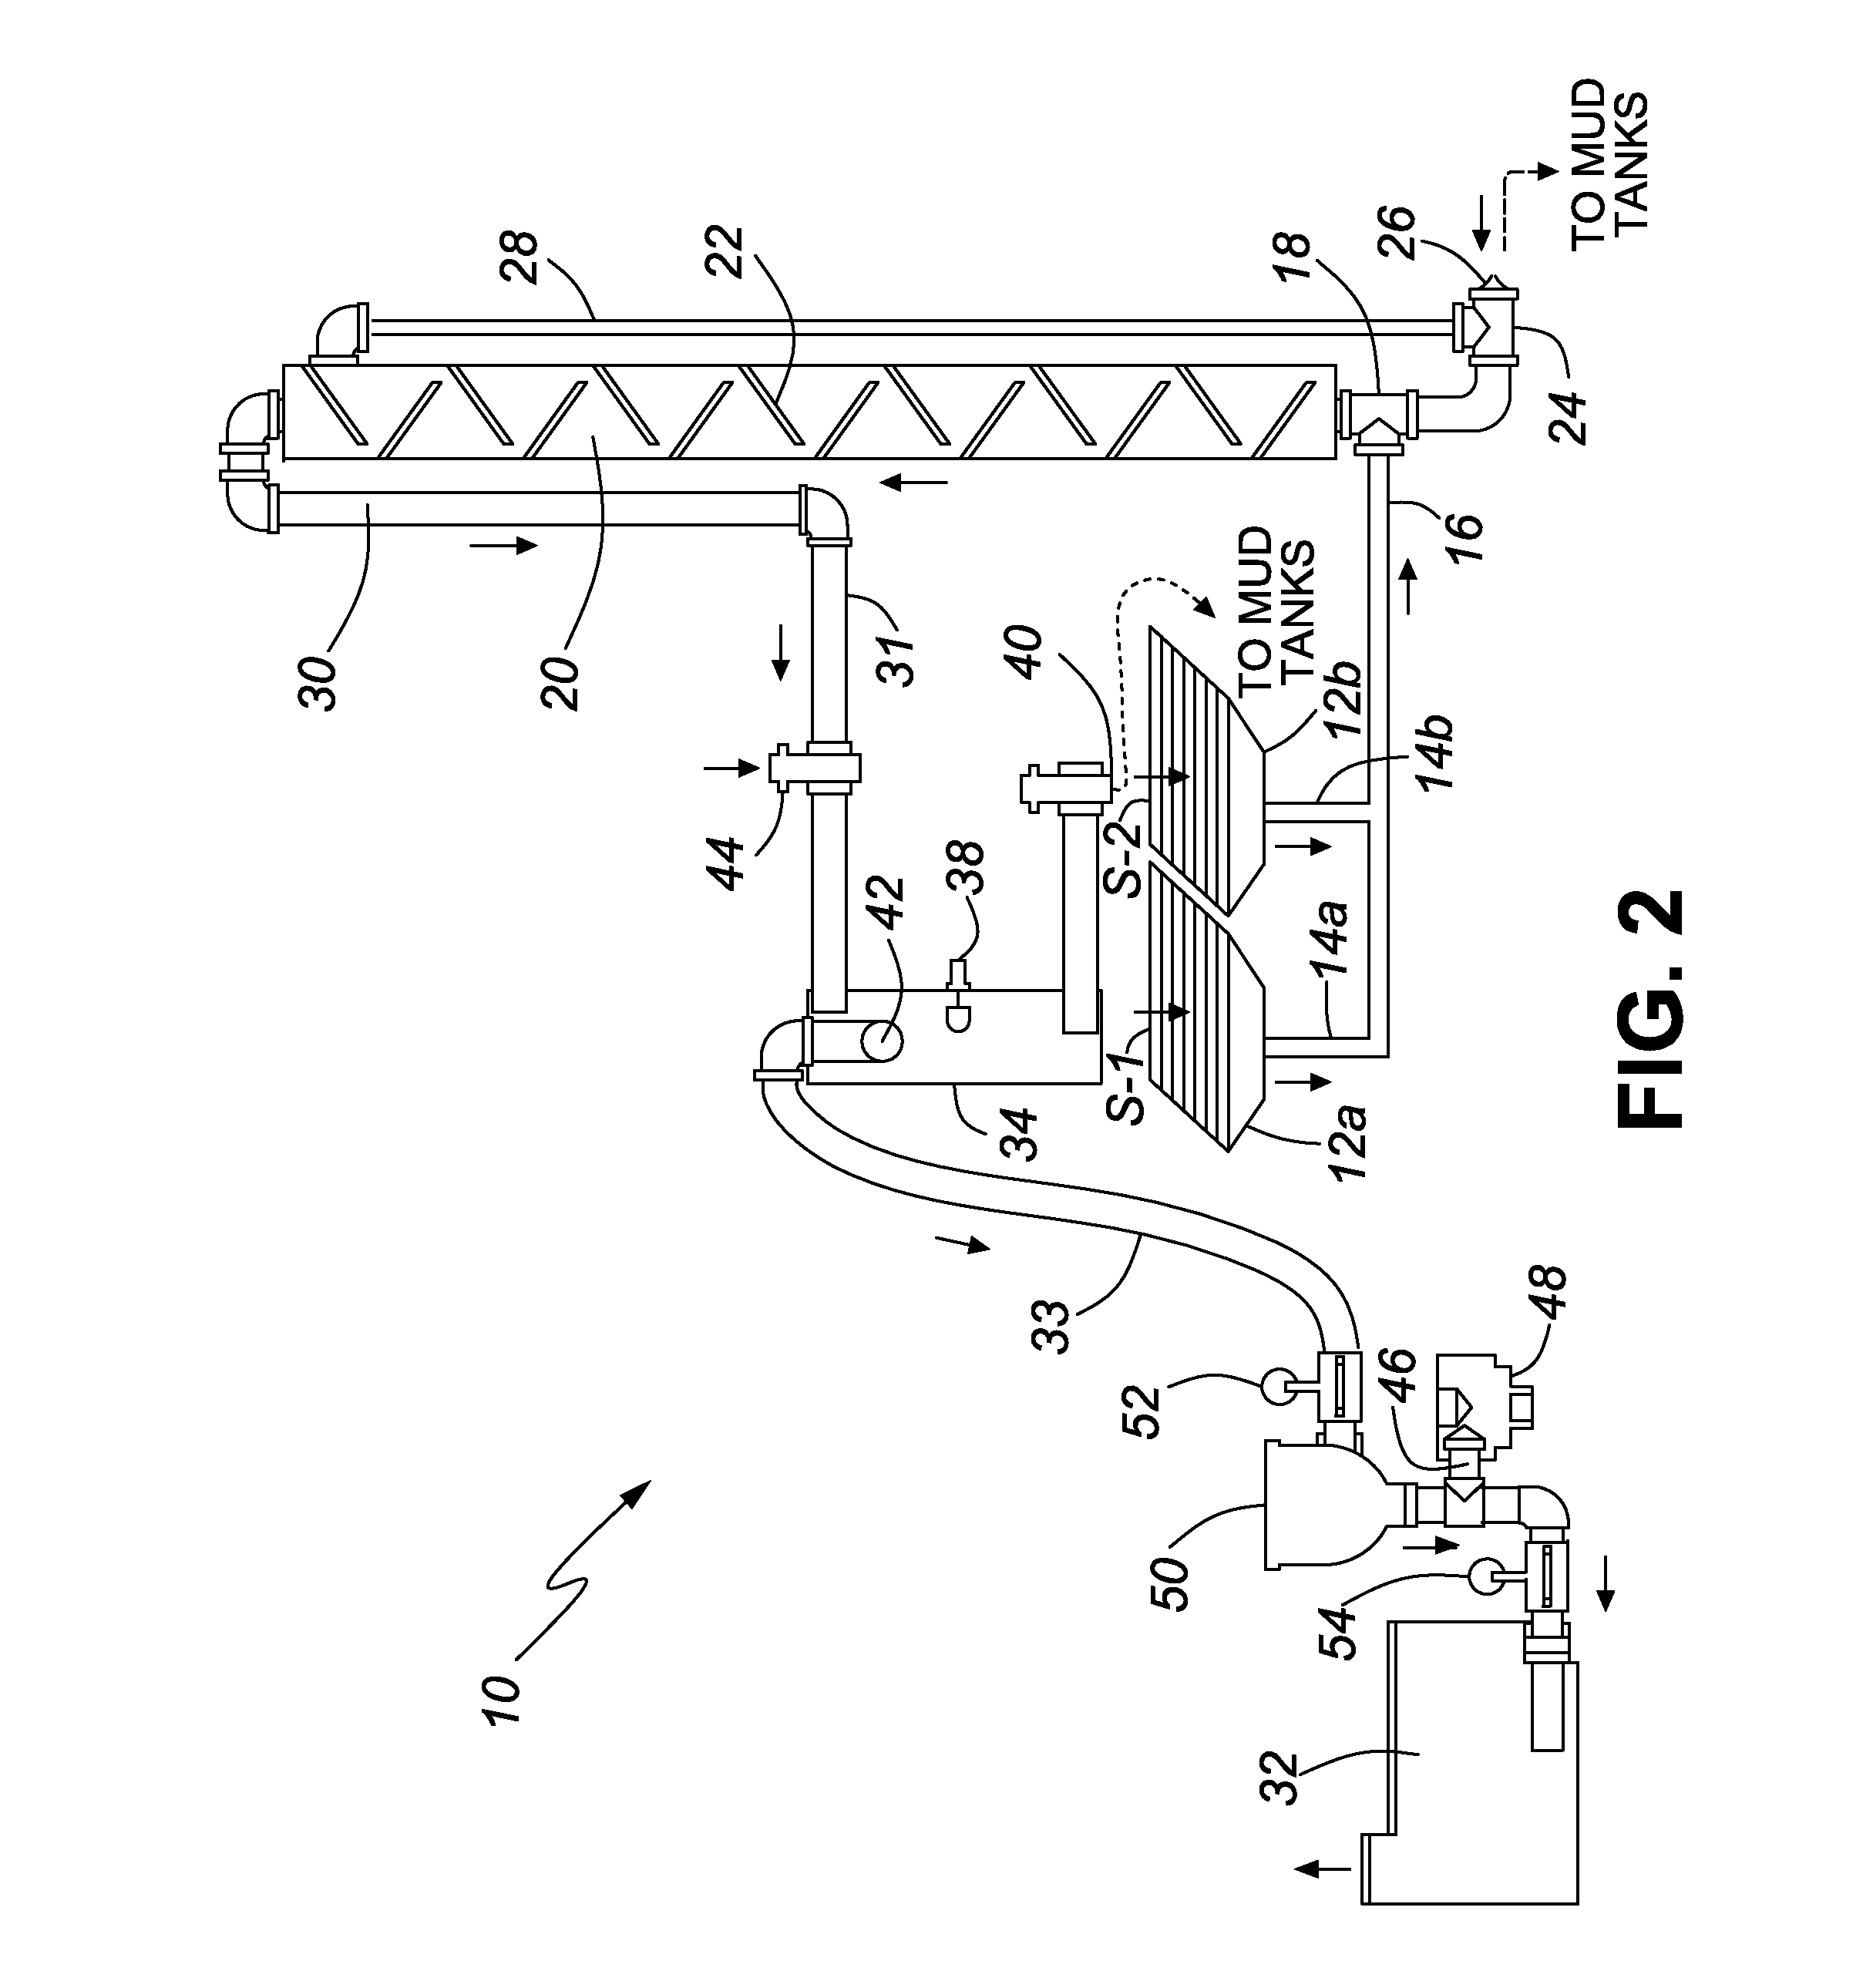 Gravity Induced Separation Of Gases And Fluids In A Vacuum-Based Drilling Fluid Recovery System